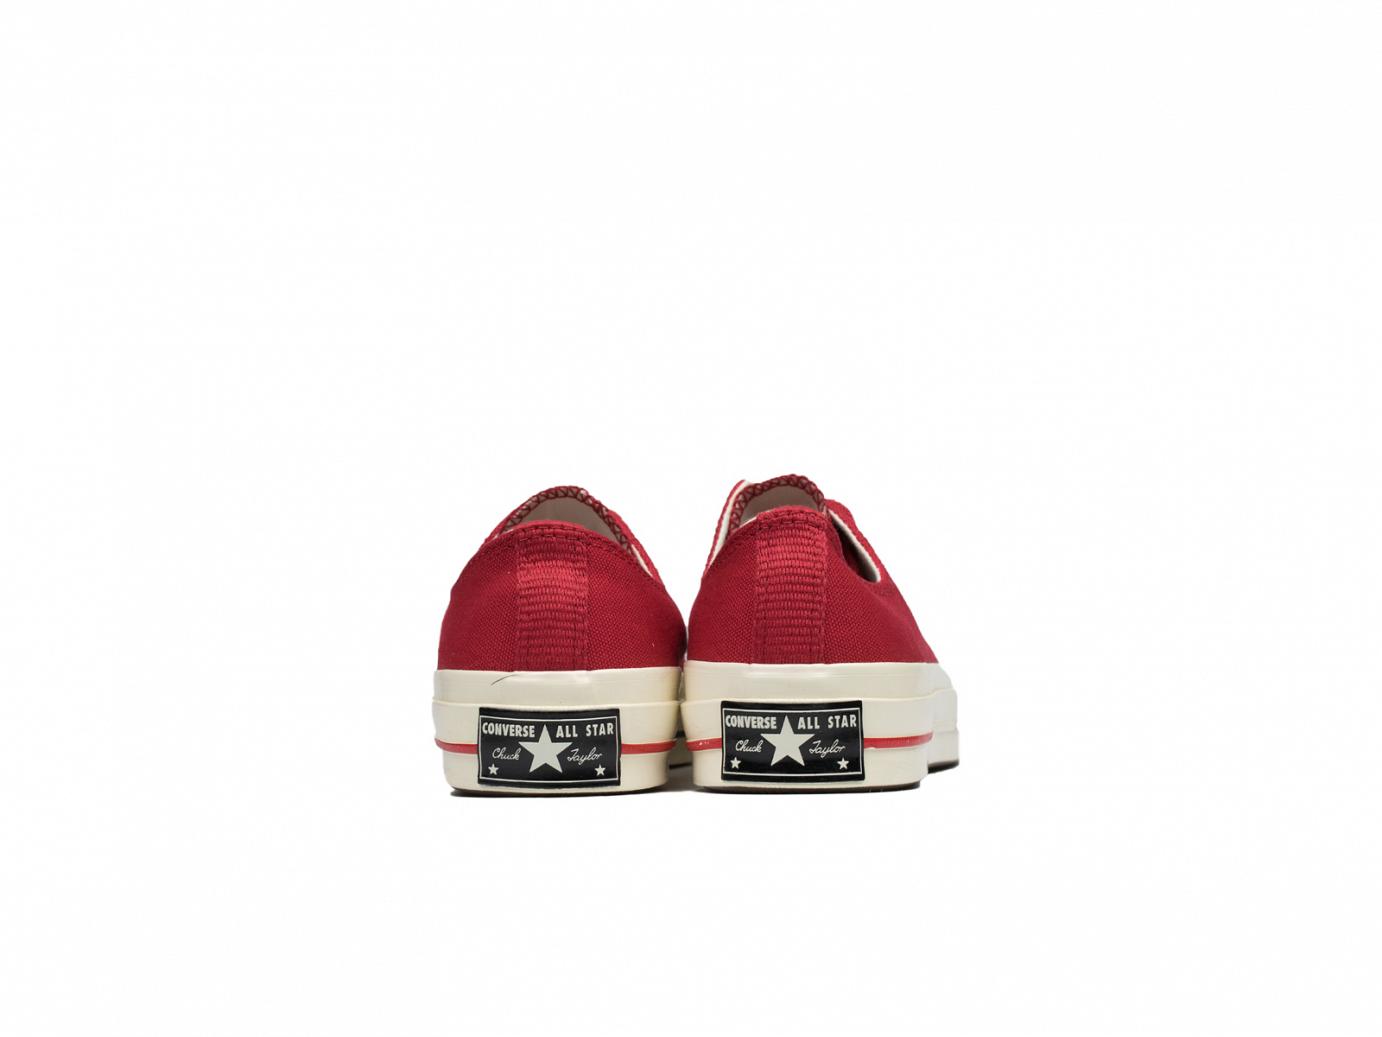 chuck taylor all star red